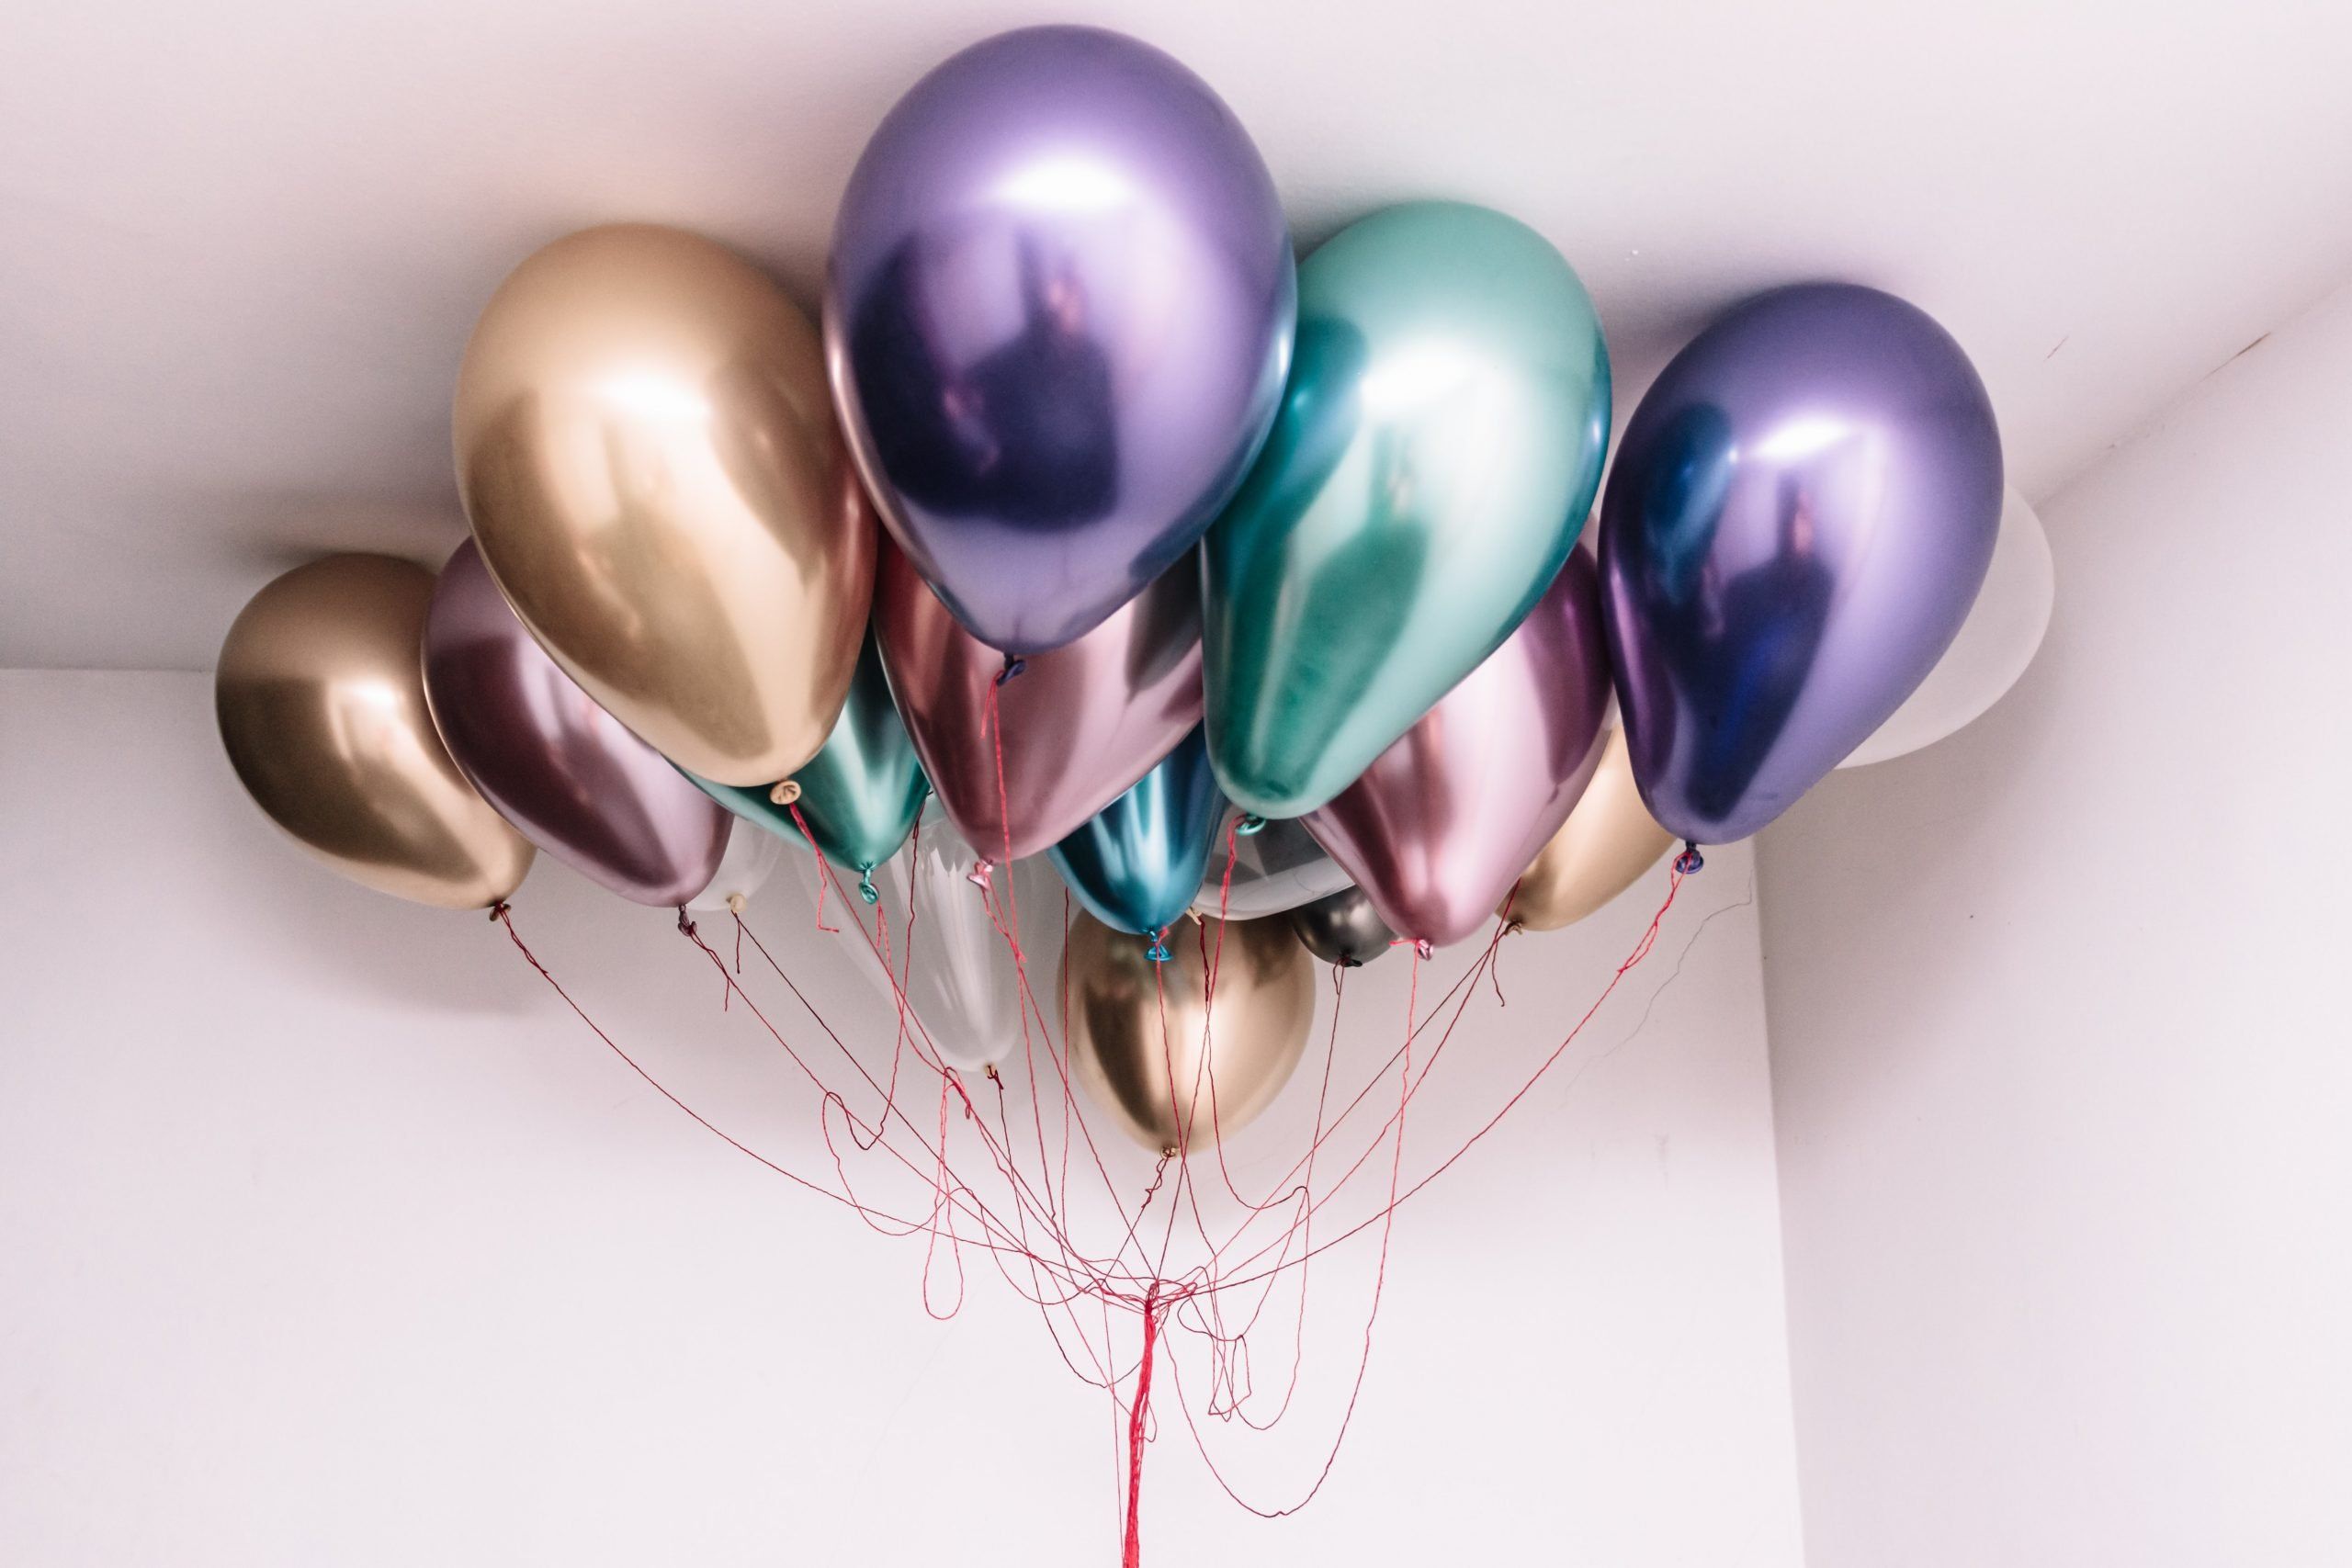 Balloon Wholesalers: Comparing Prices, Quality, and Services for the Best Deals